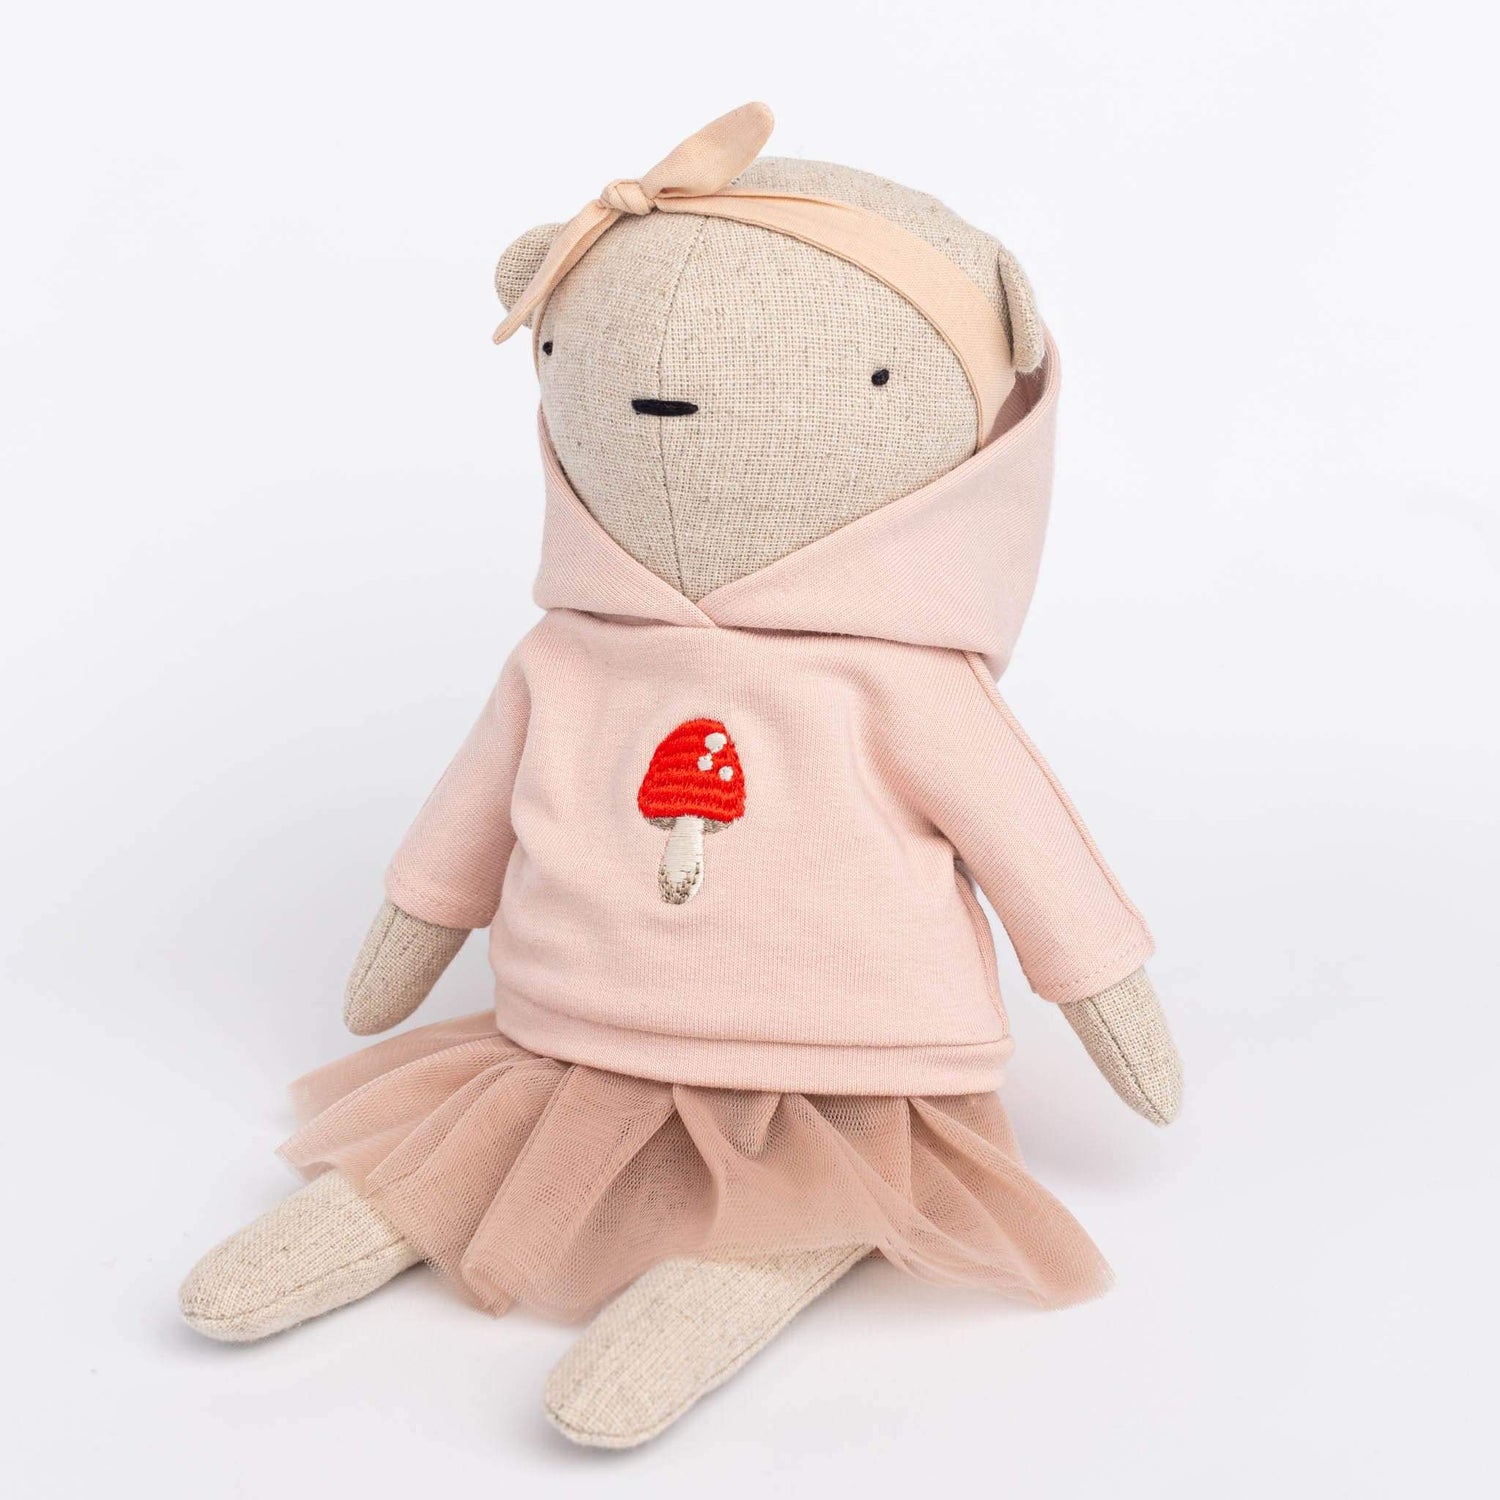 Cozymoss Soft Toys Bear Melody - Handmade Soft Linen Toy Bear with Clothes Set